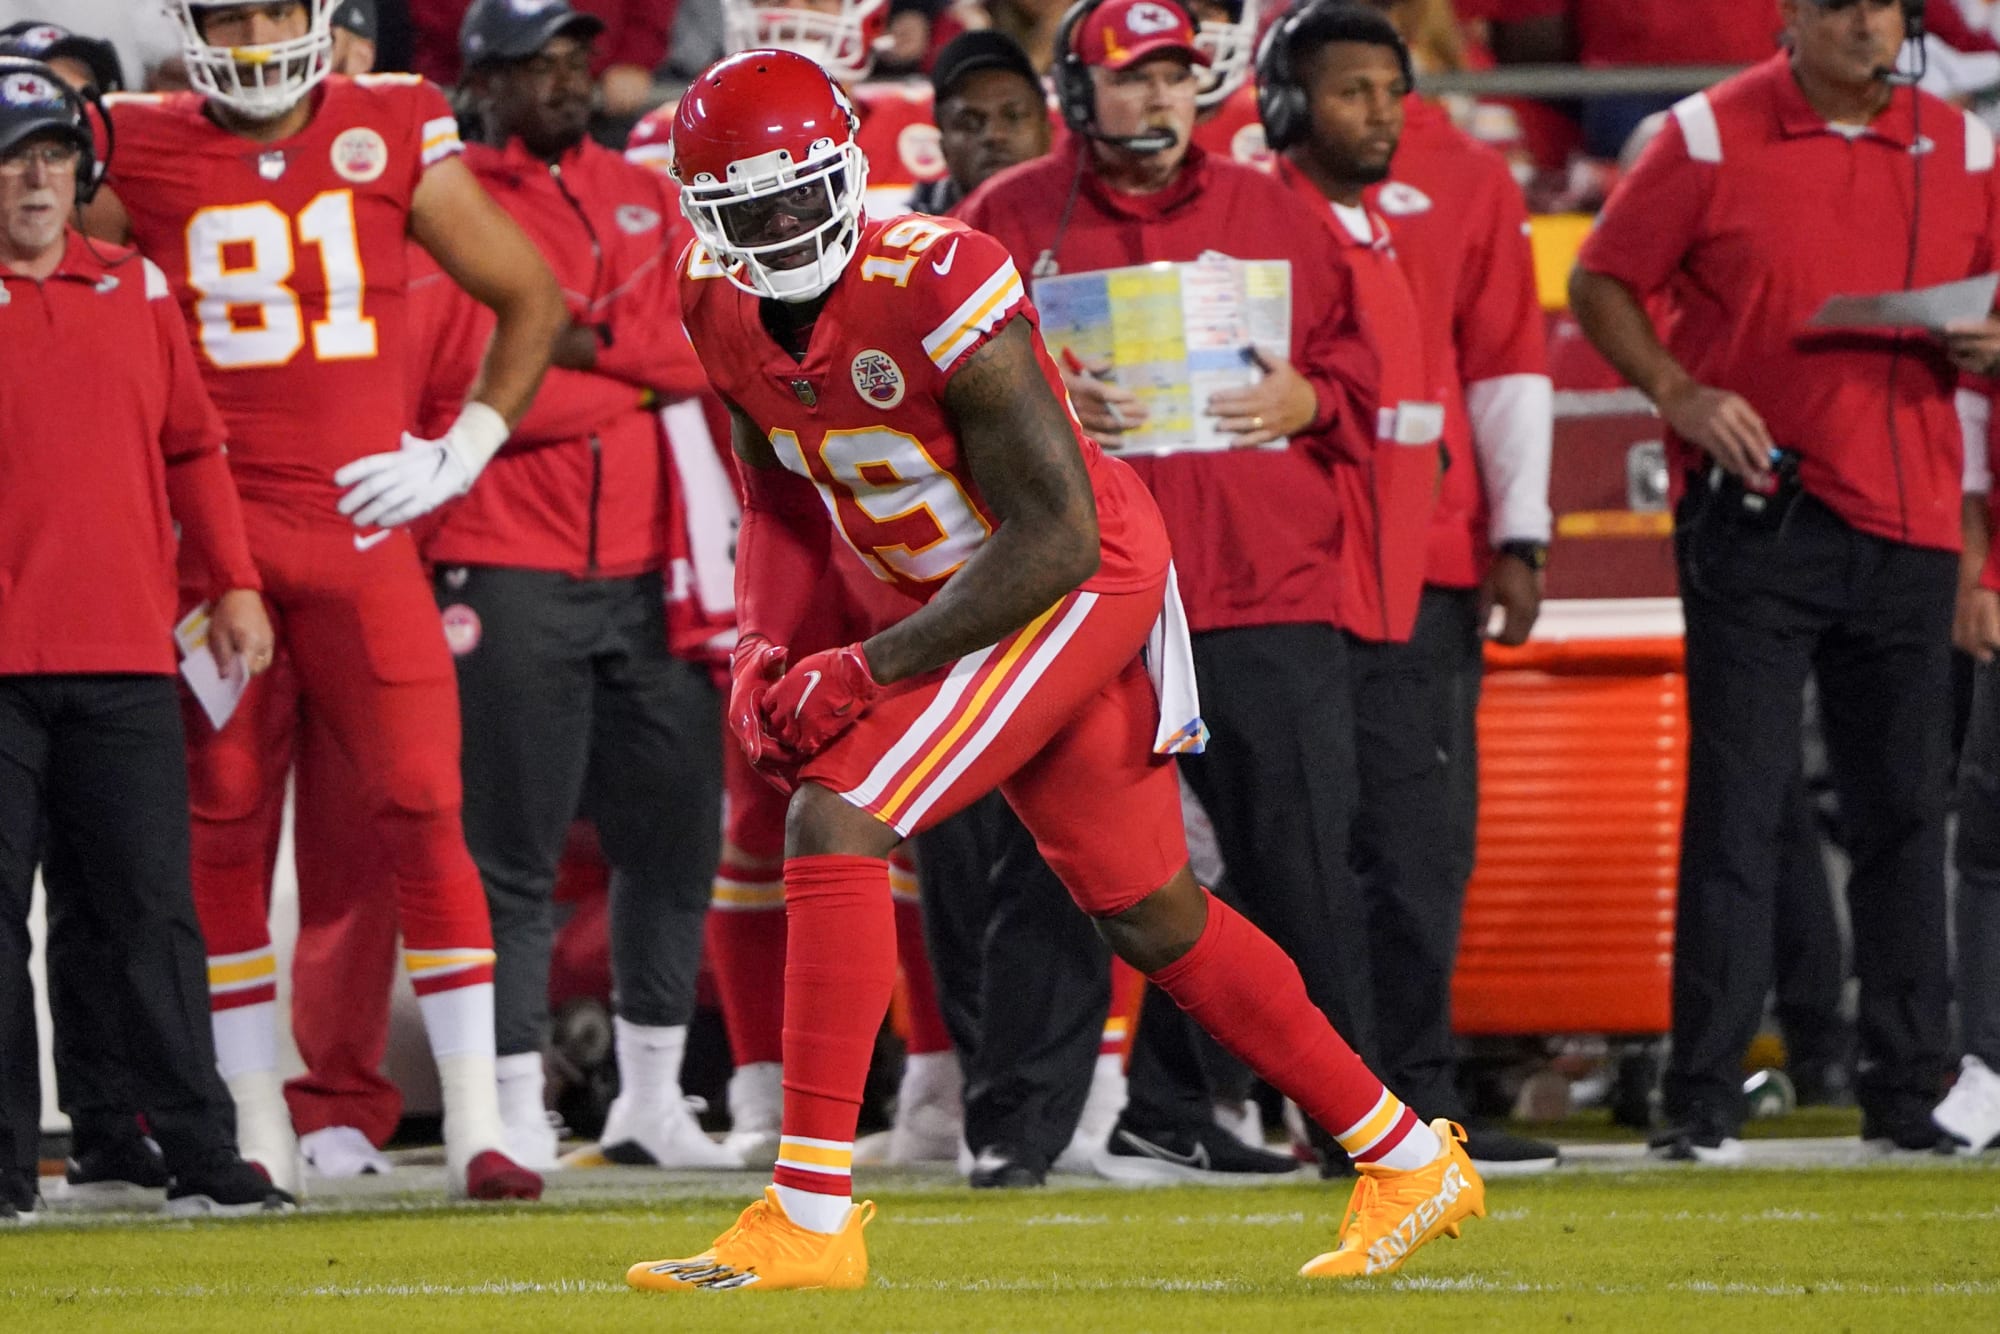 Andy Reid’s comments on Josh Gordon will excite fans